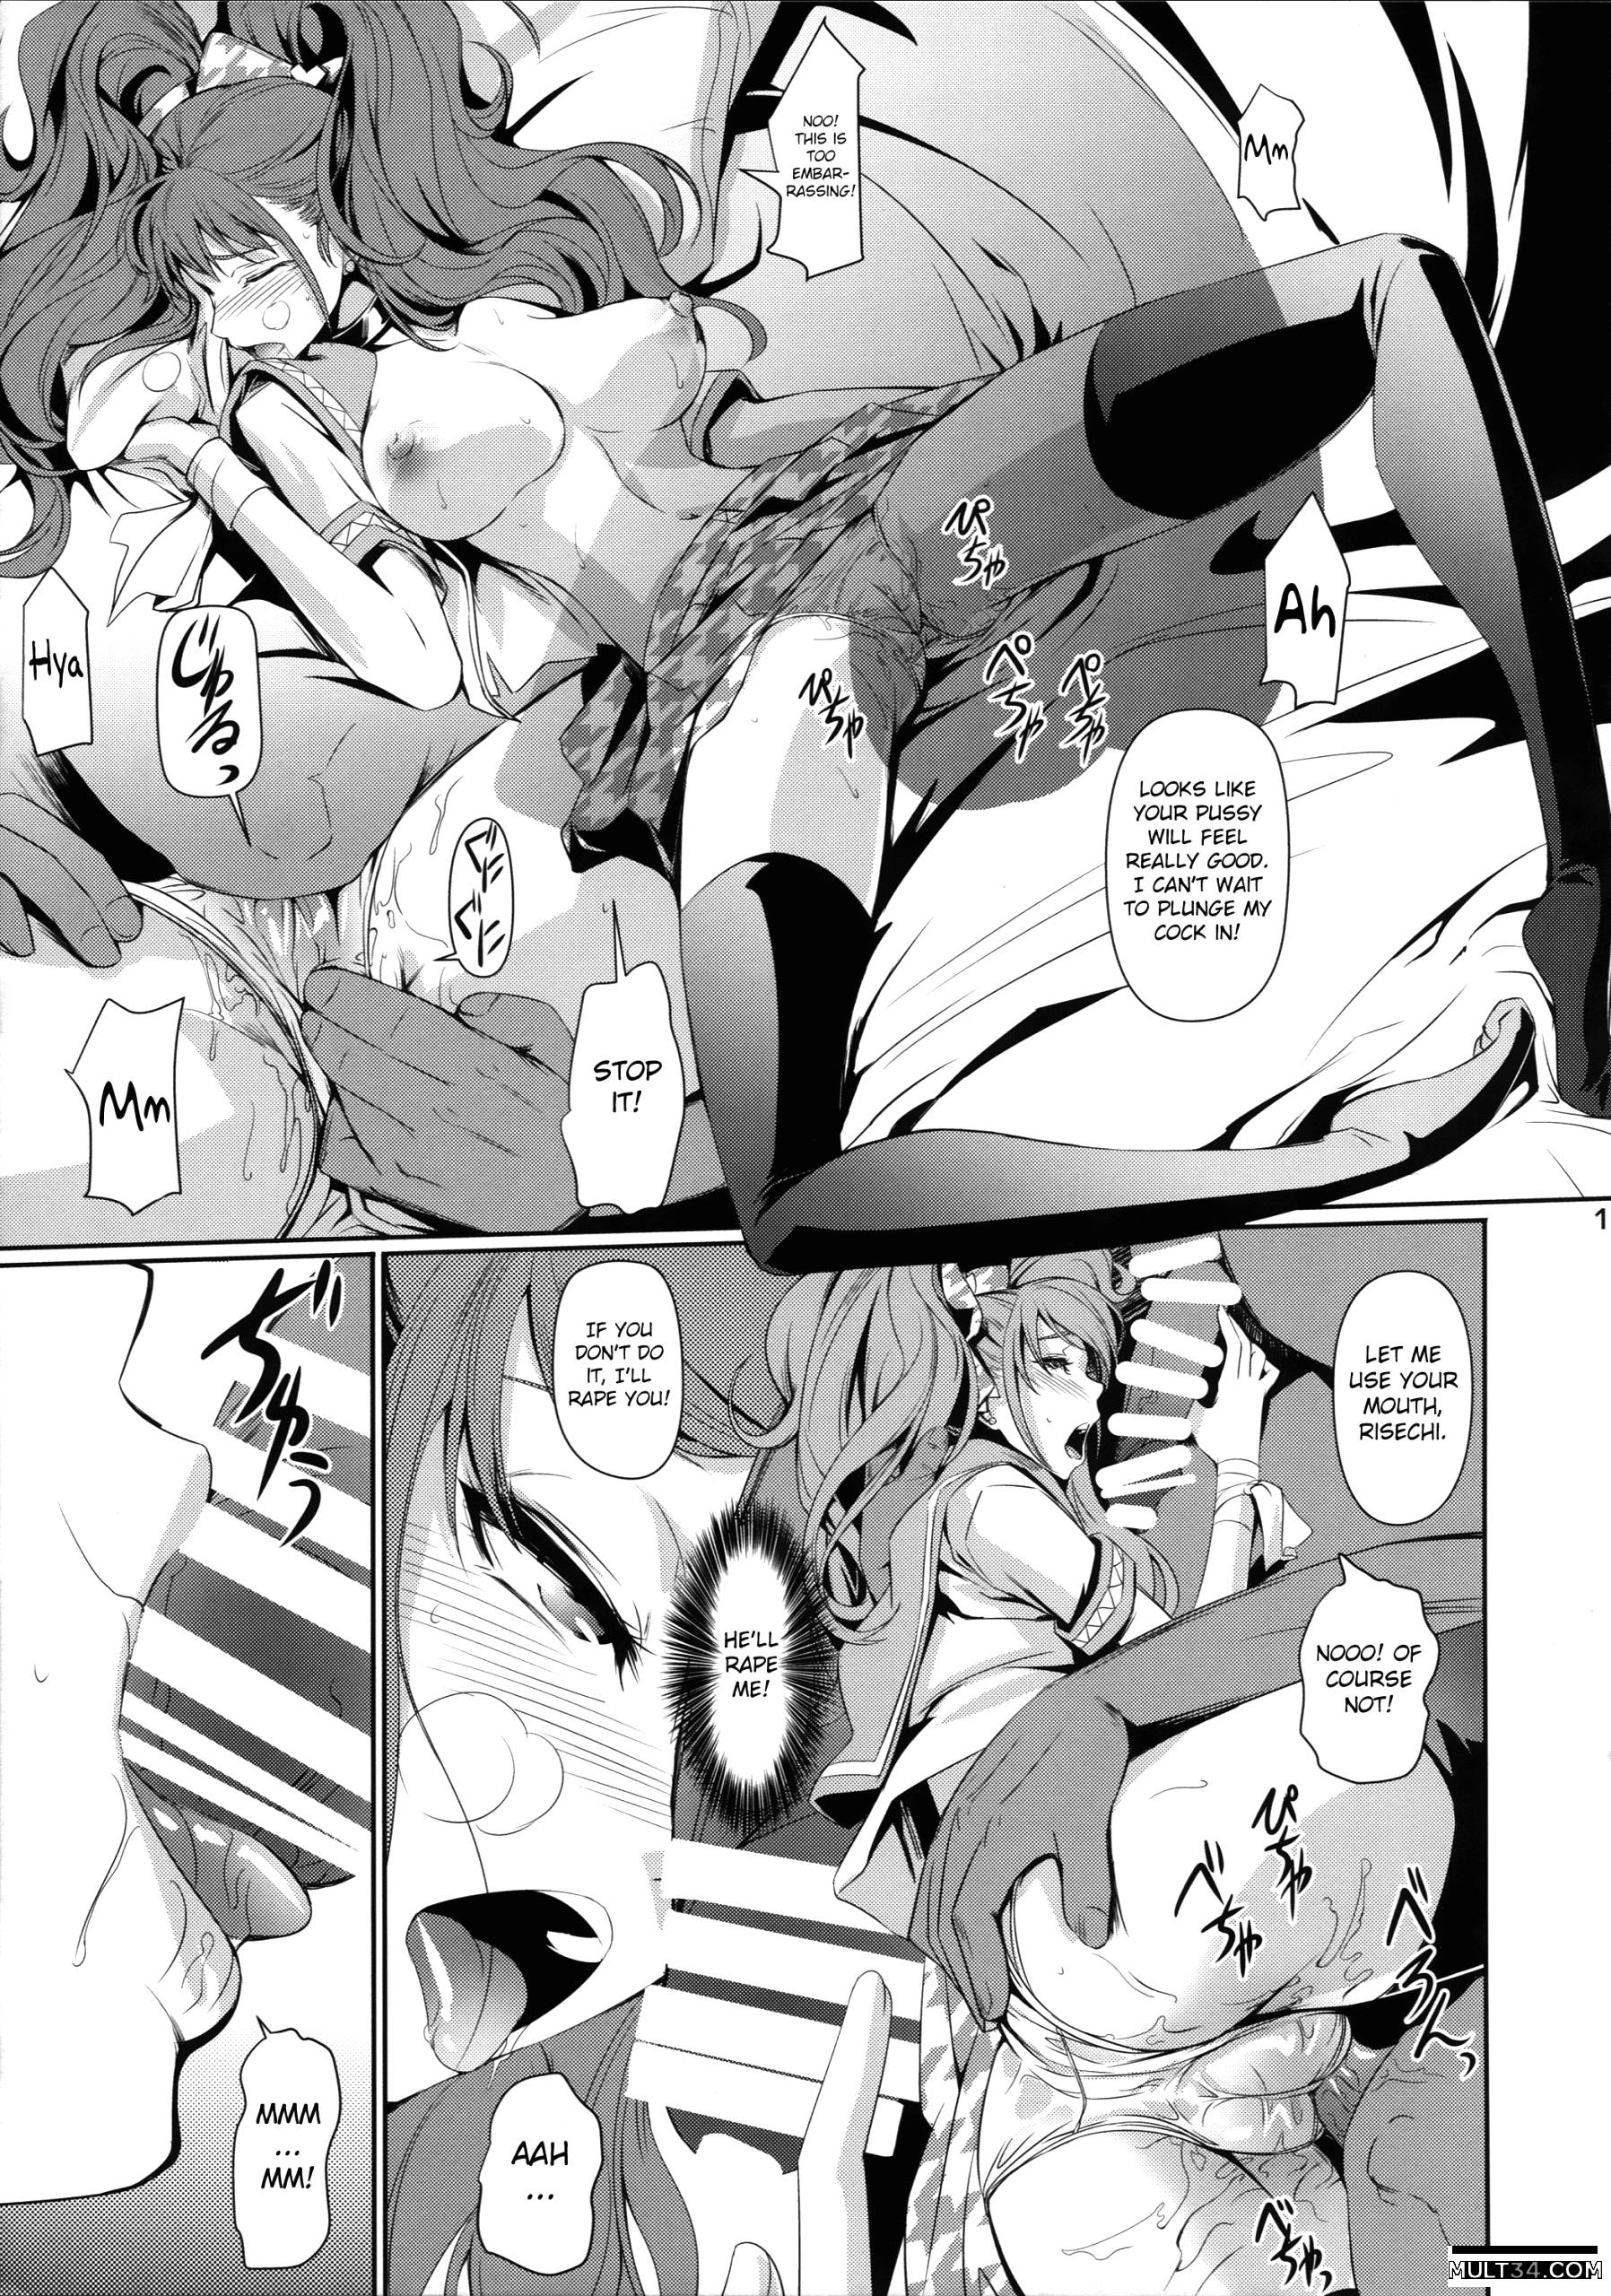 Rise Chie page 11